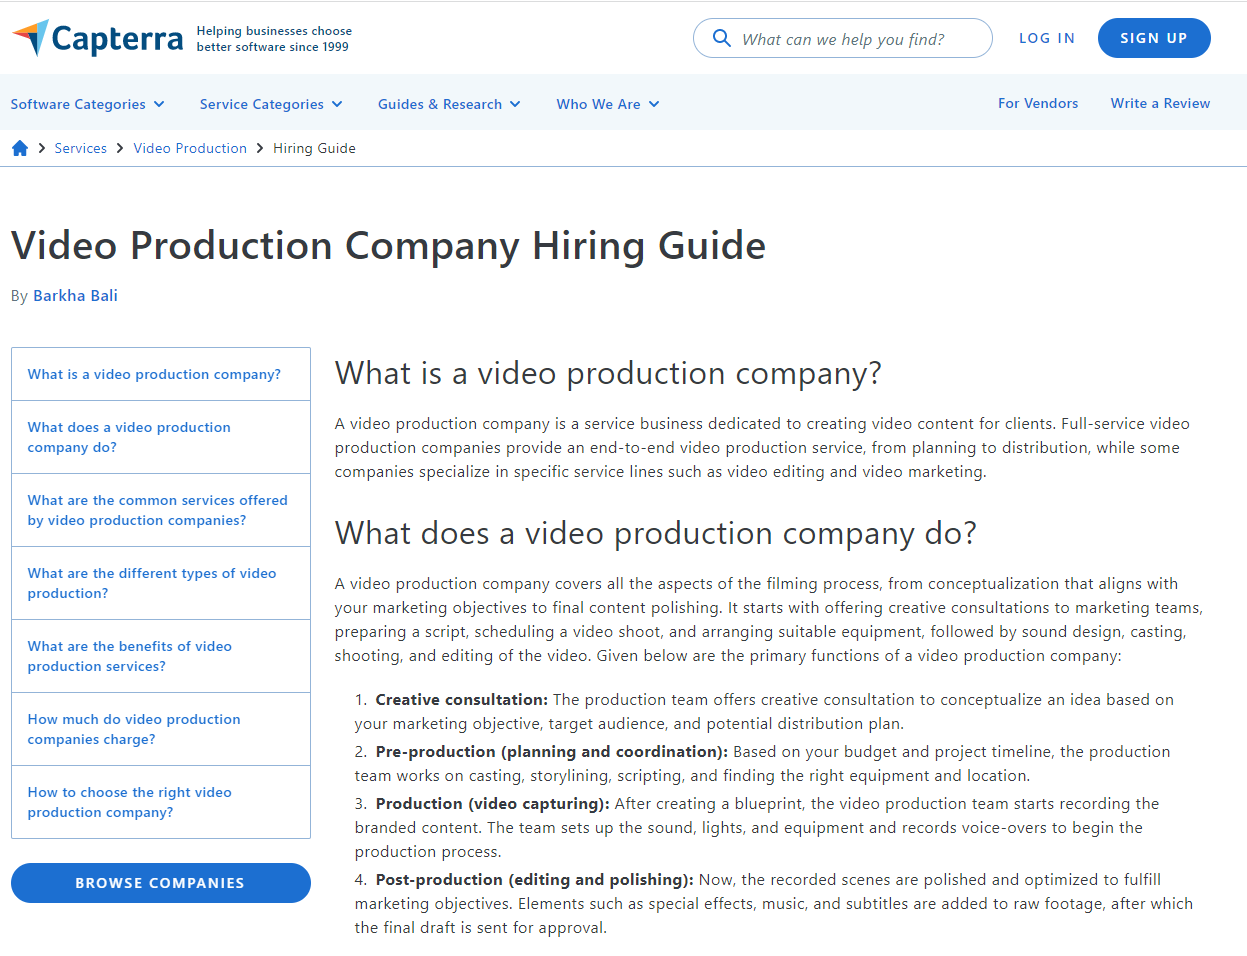 Capterras-Video-Production-Company-Hiring-Guide